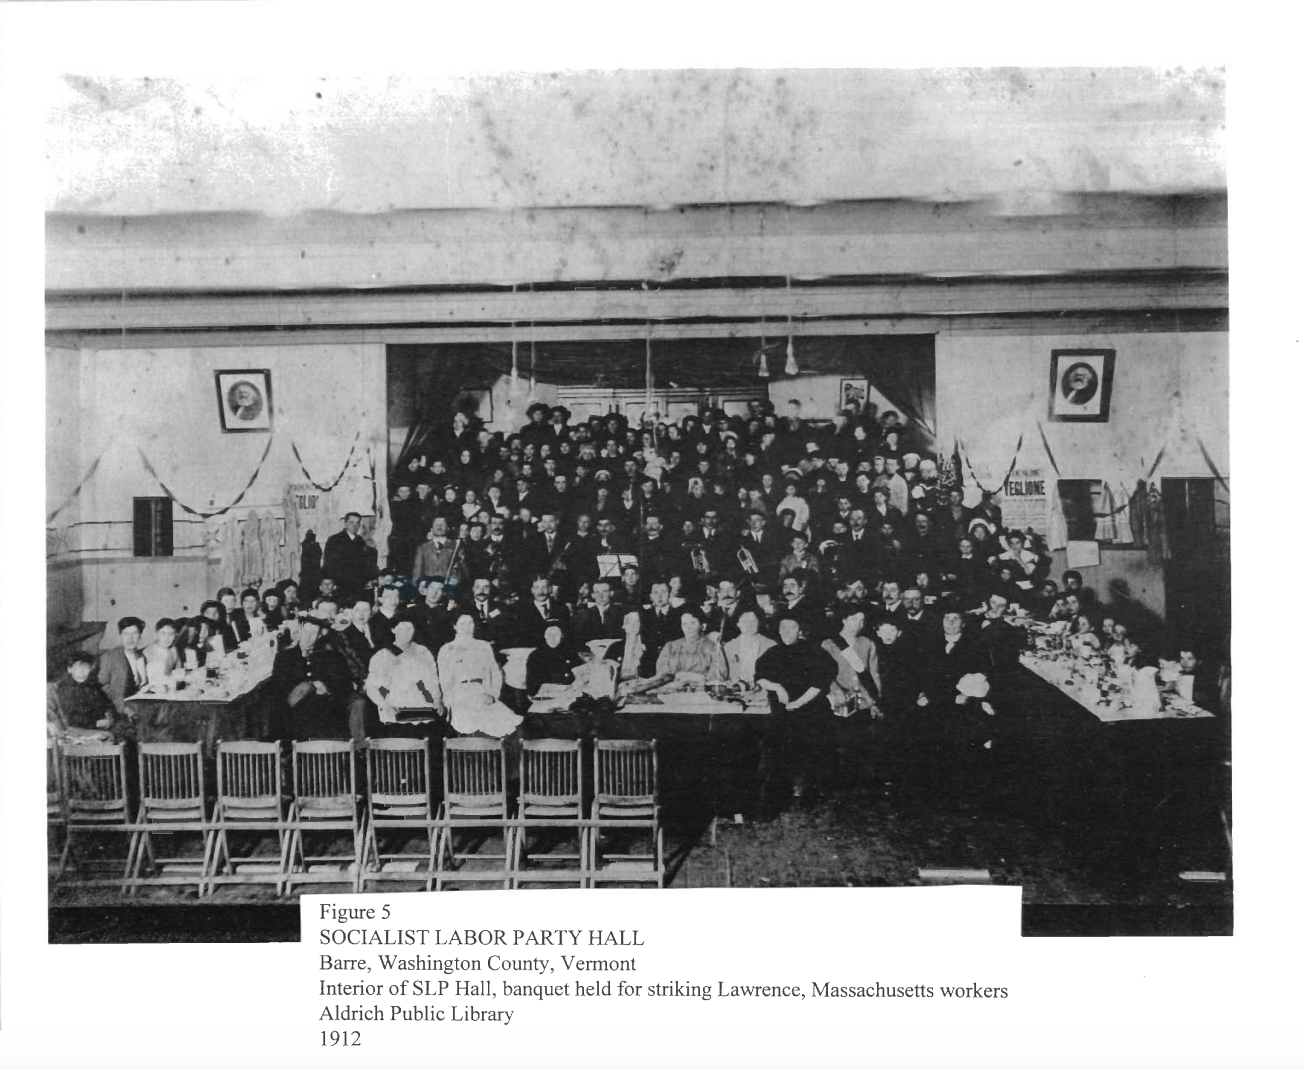 Socialist Labor Party Hall celebration for striking mill children in Lowell, MA